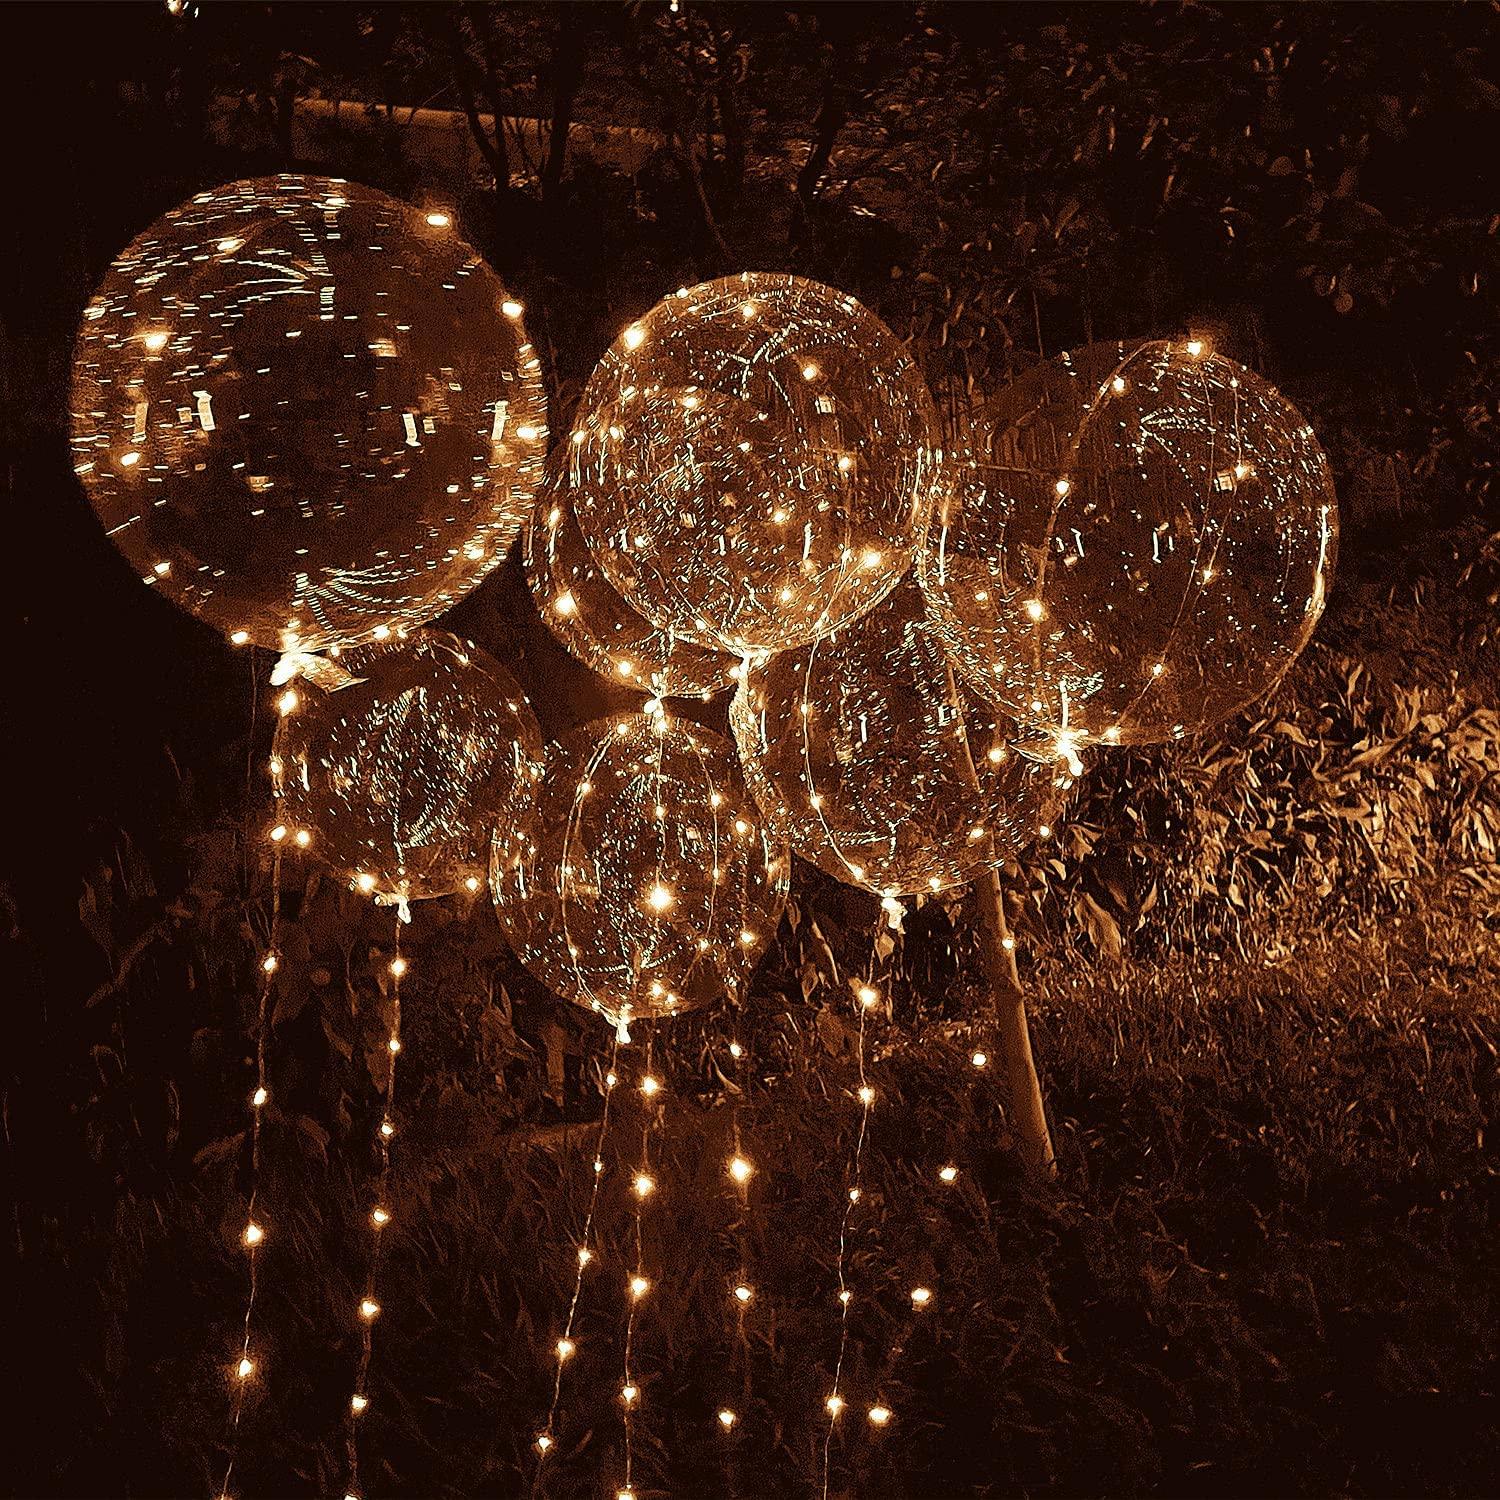 Reusable Warm Led Balloons for Graduation Glow Party Decorations - If you say i do